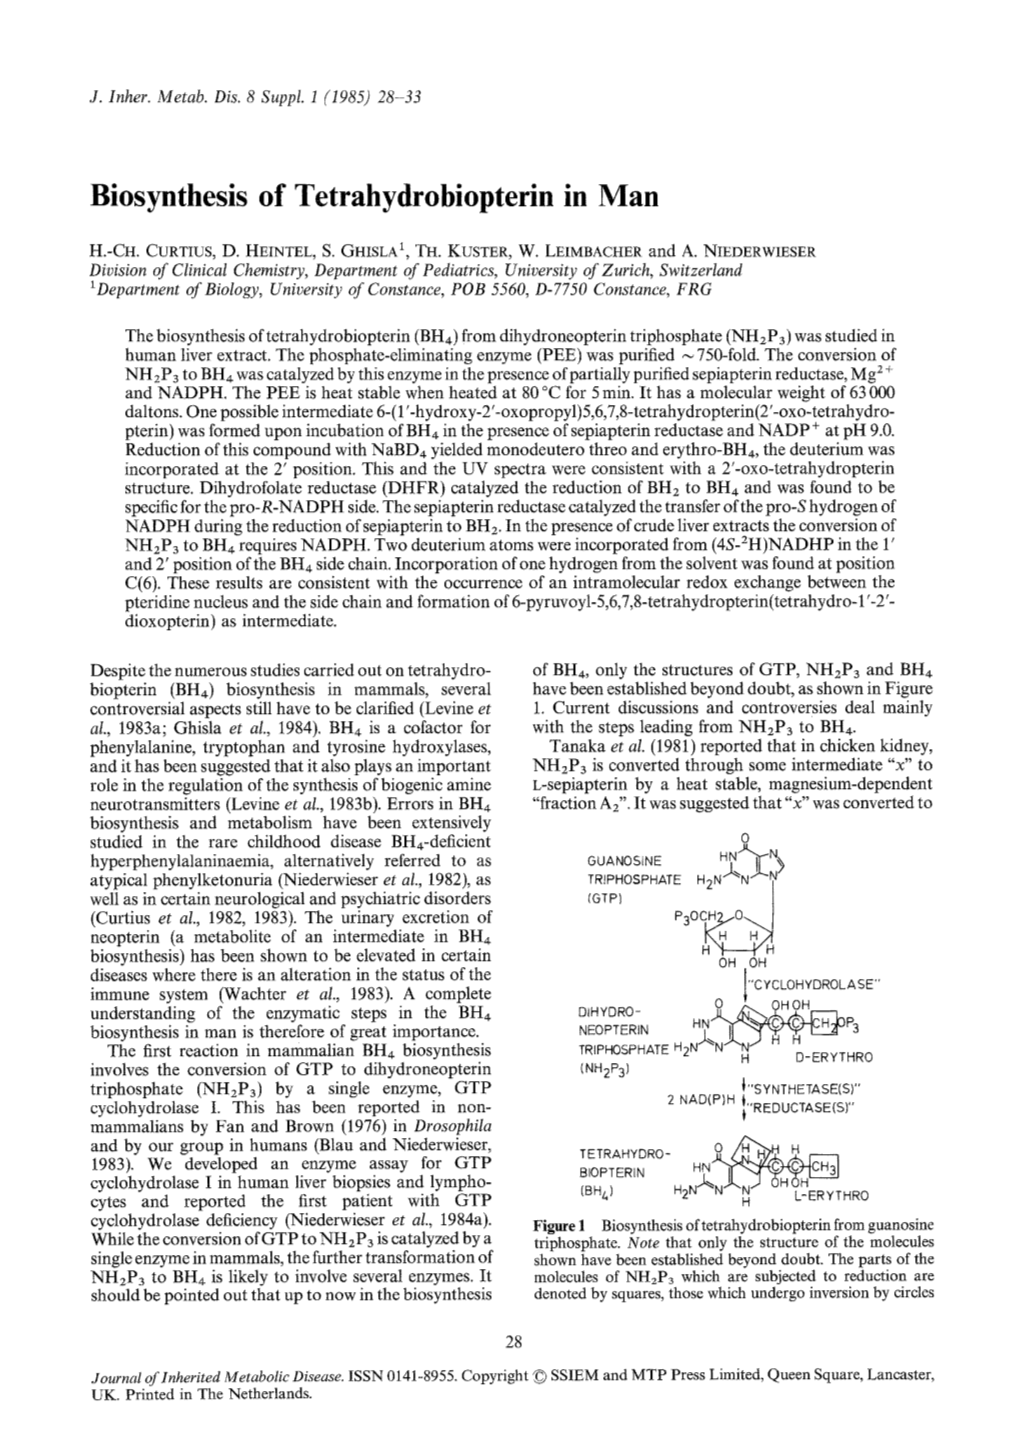 Biosynthesis of Tetrahydrobiopterin in Man